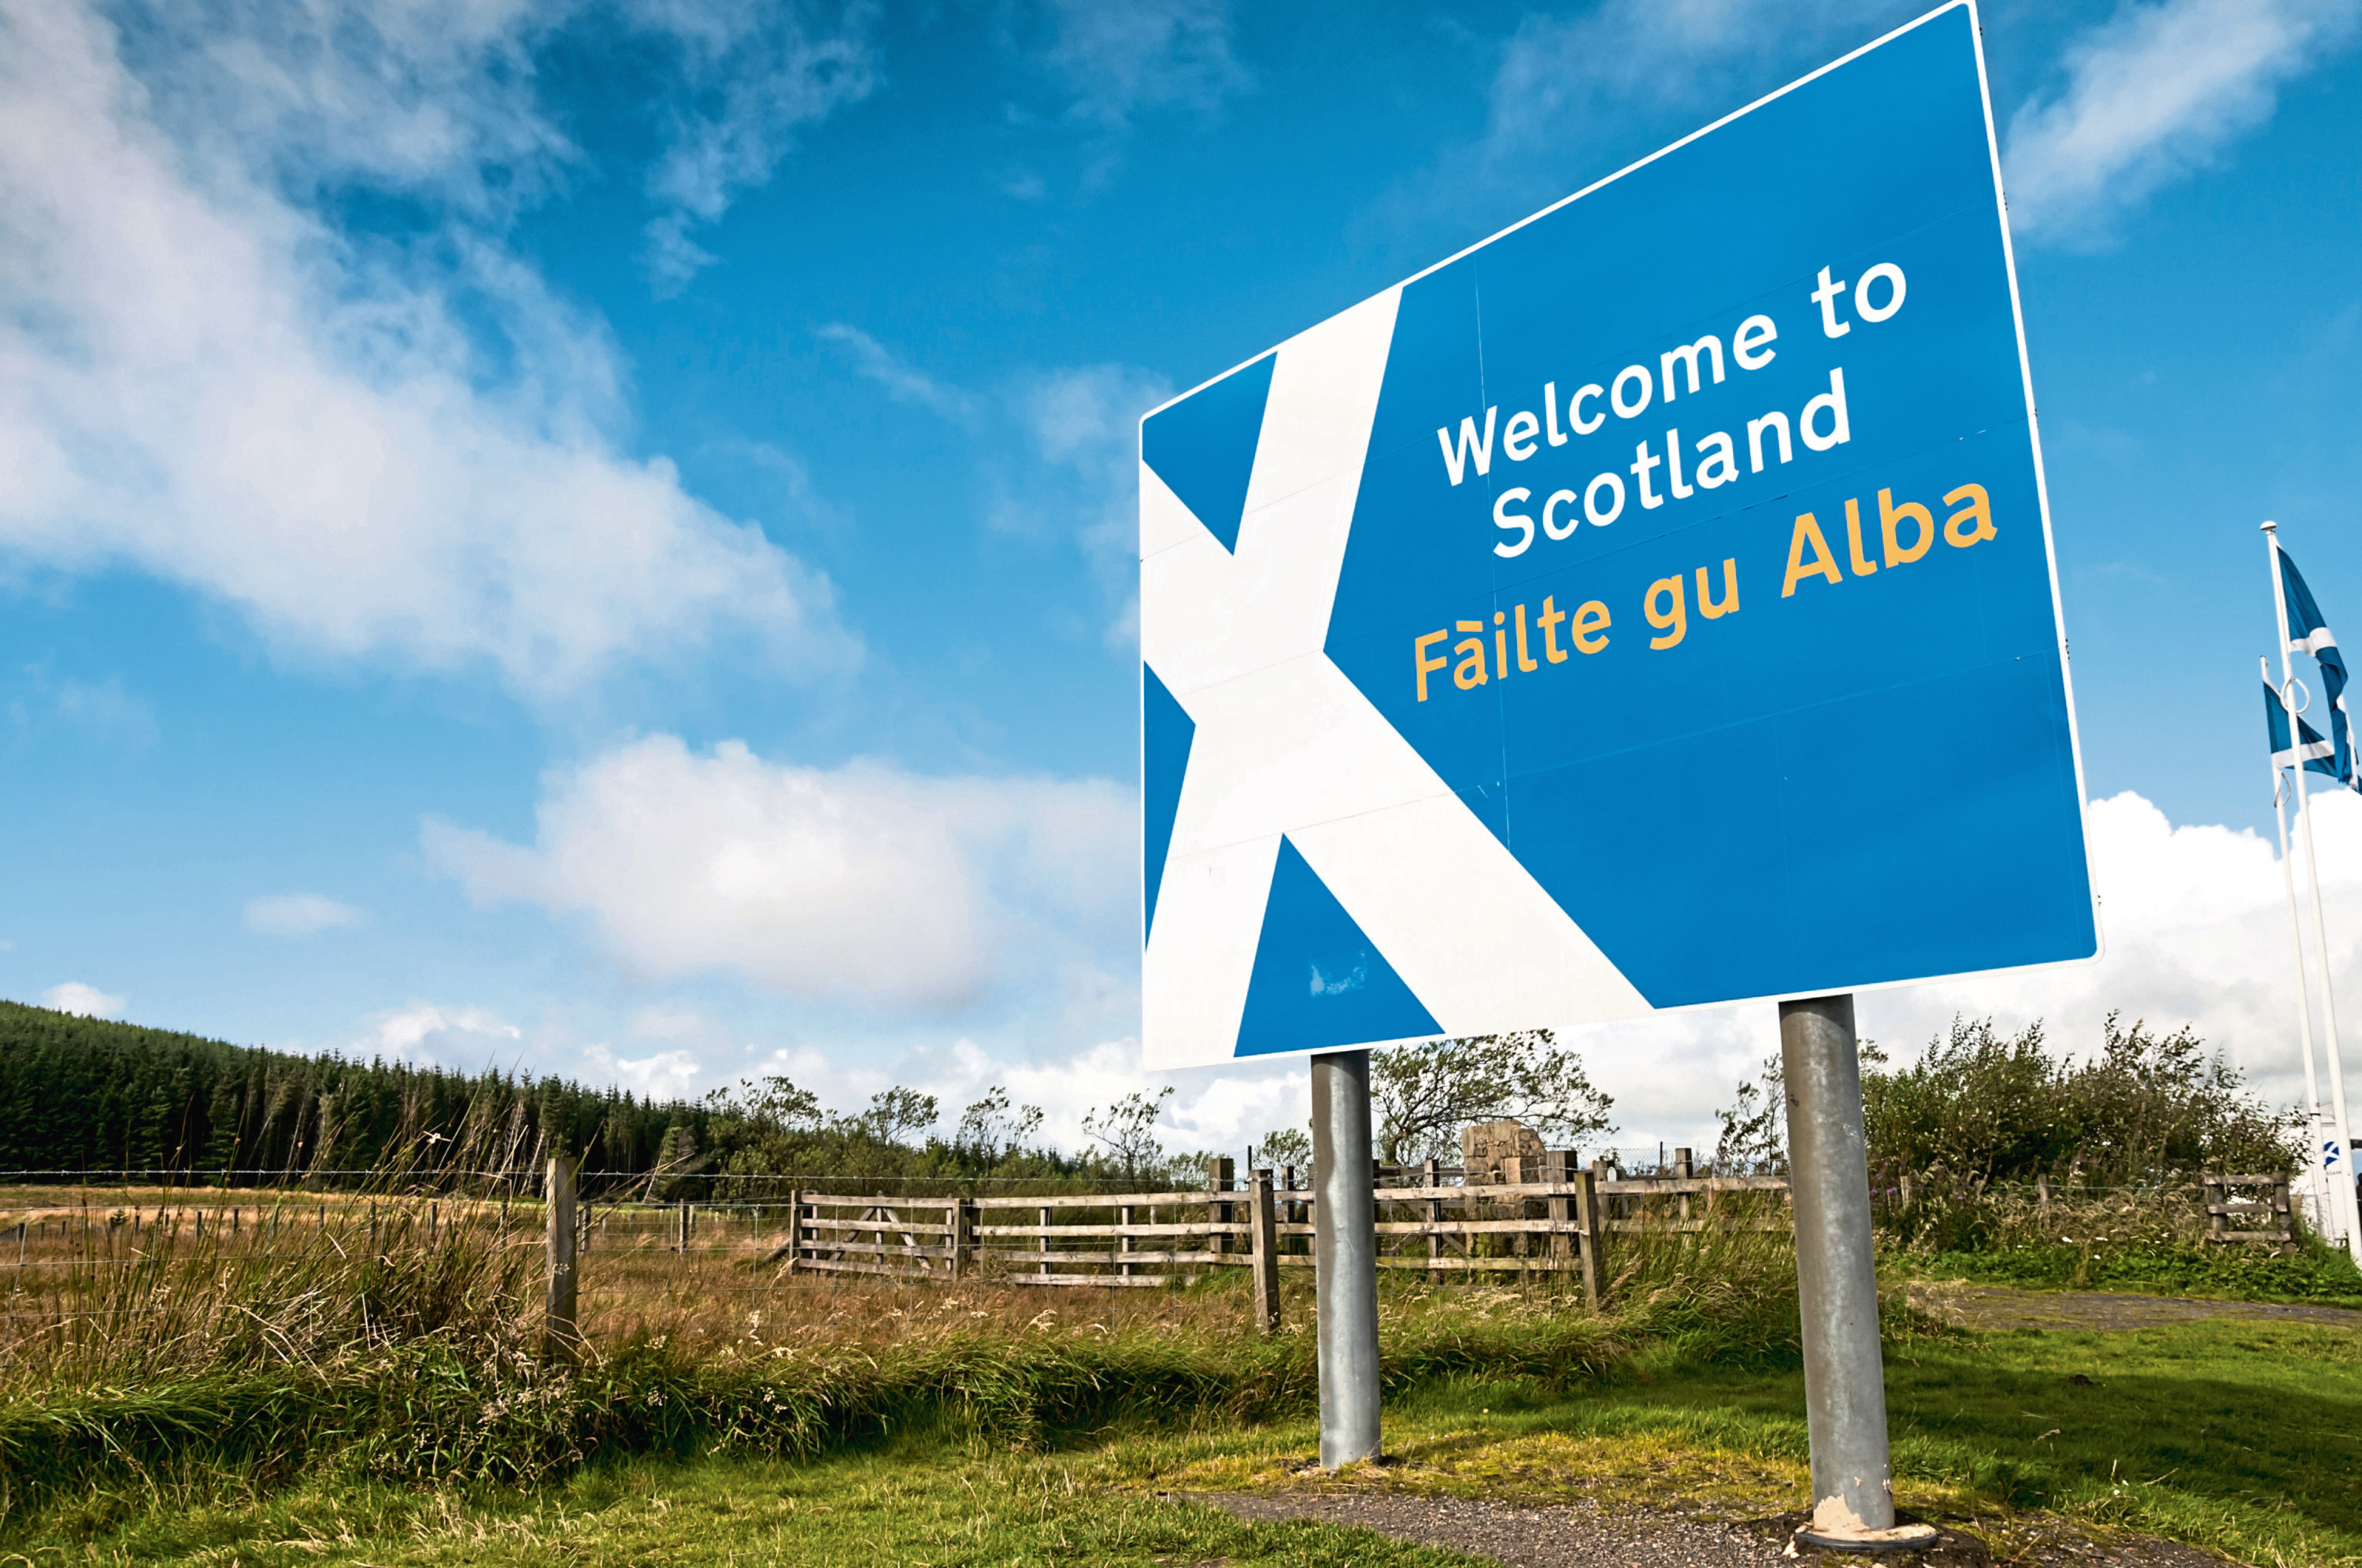 Welcome to Scotland sign at Scottish border